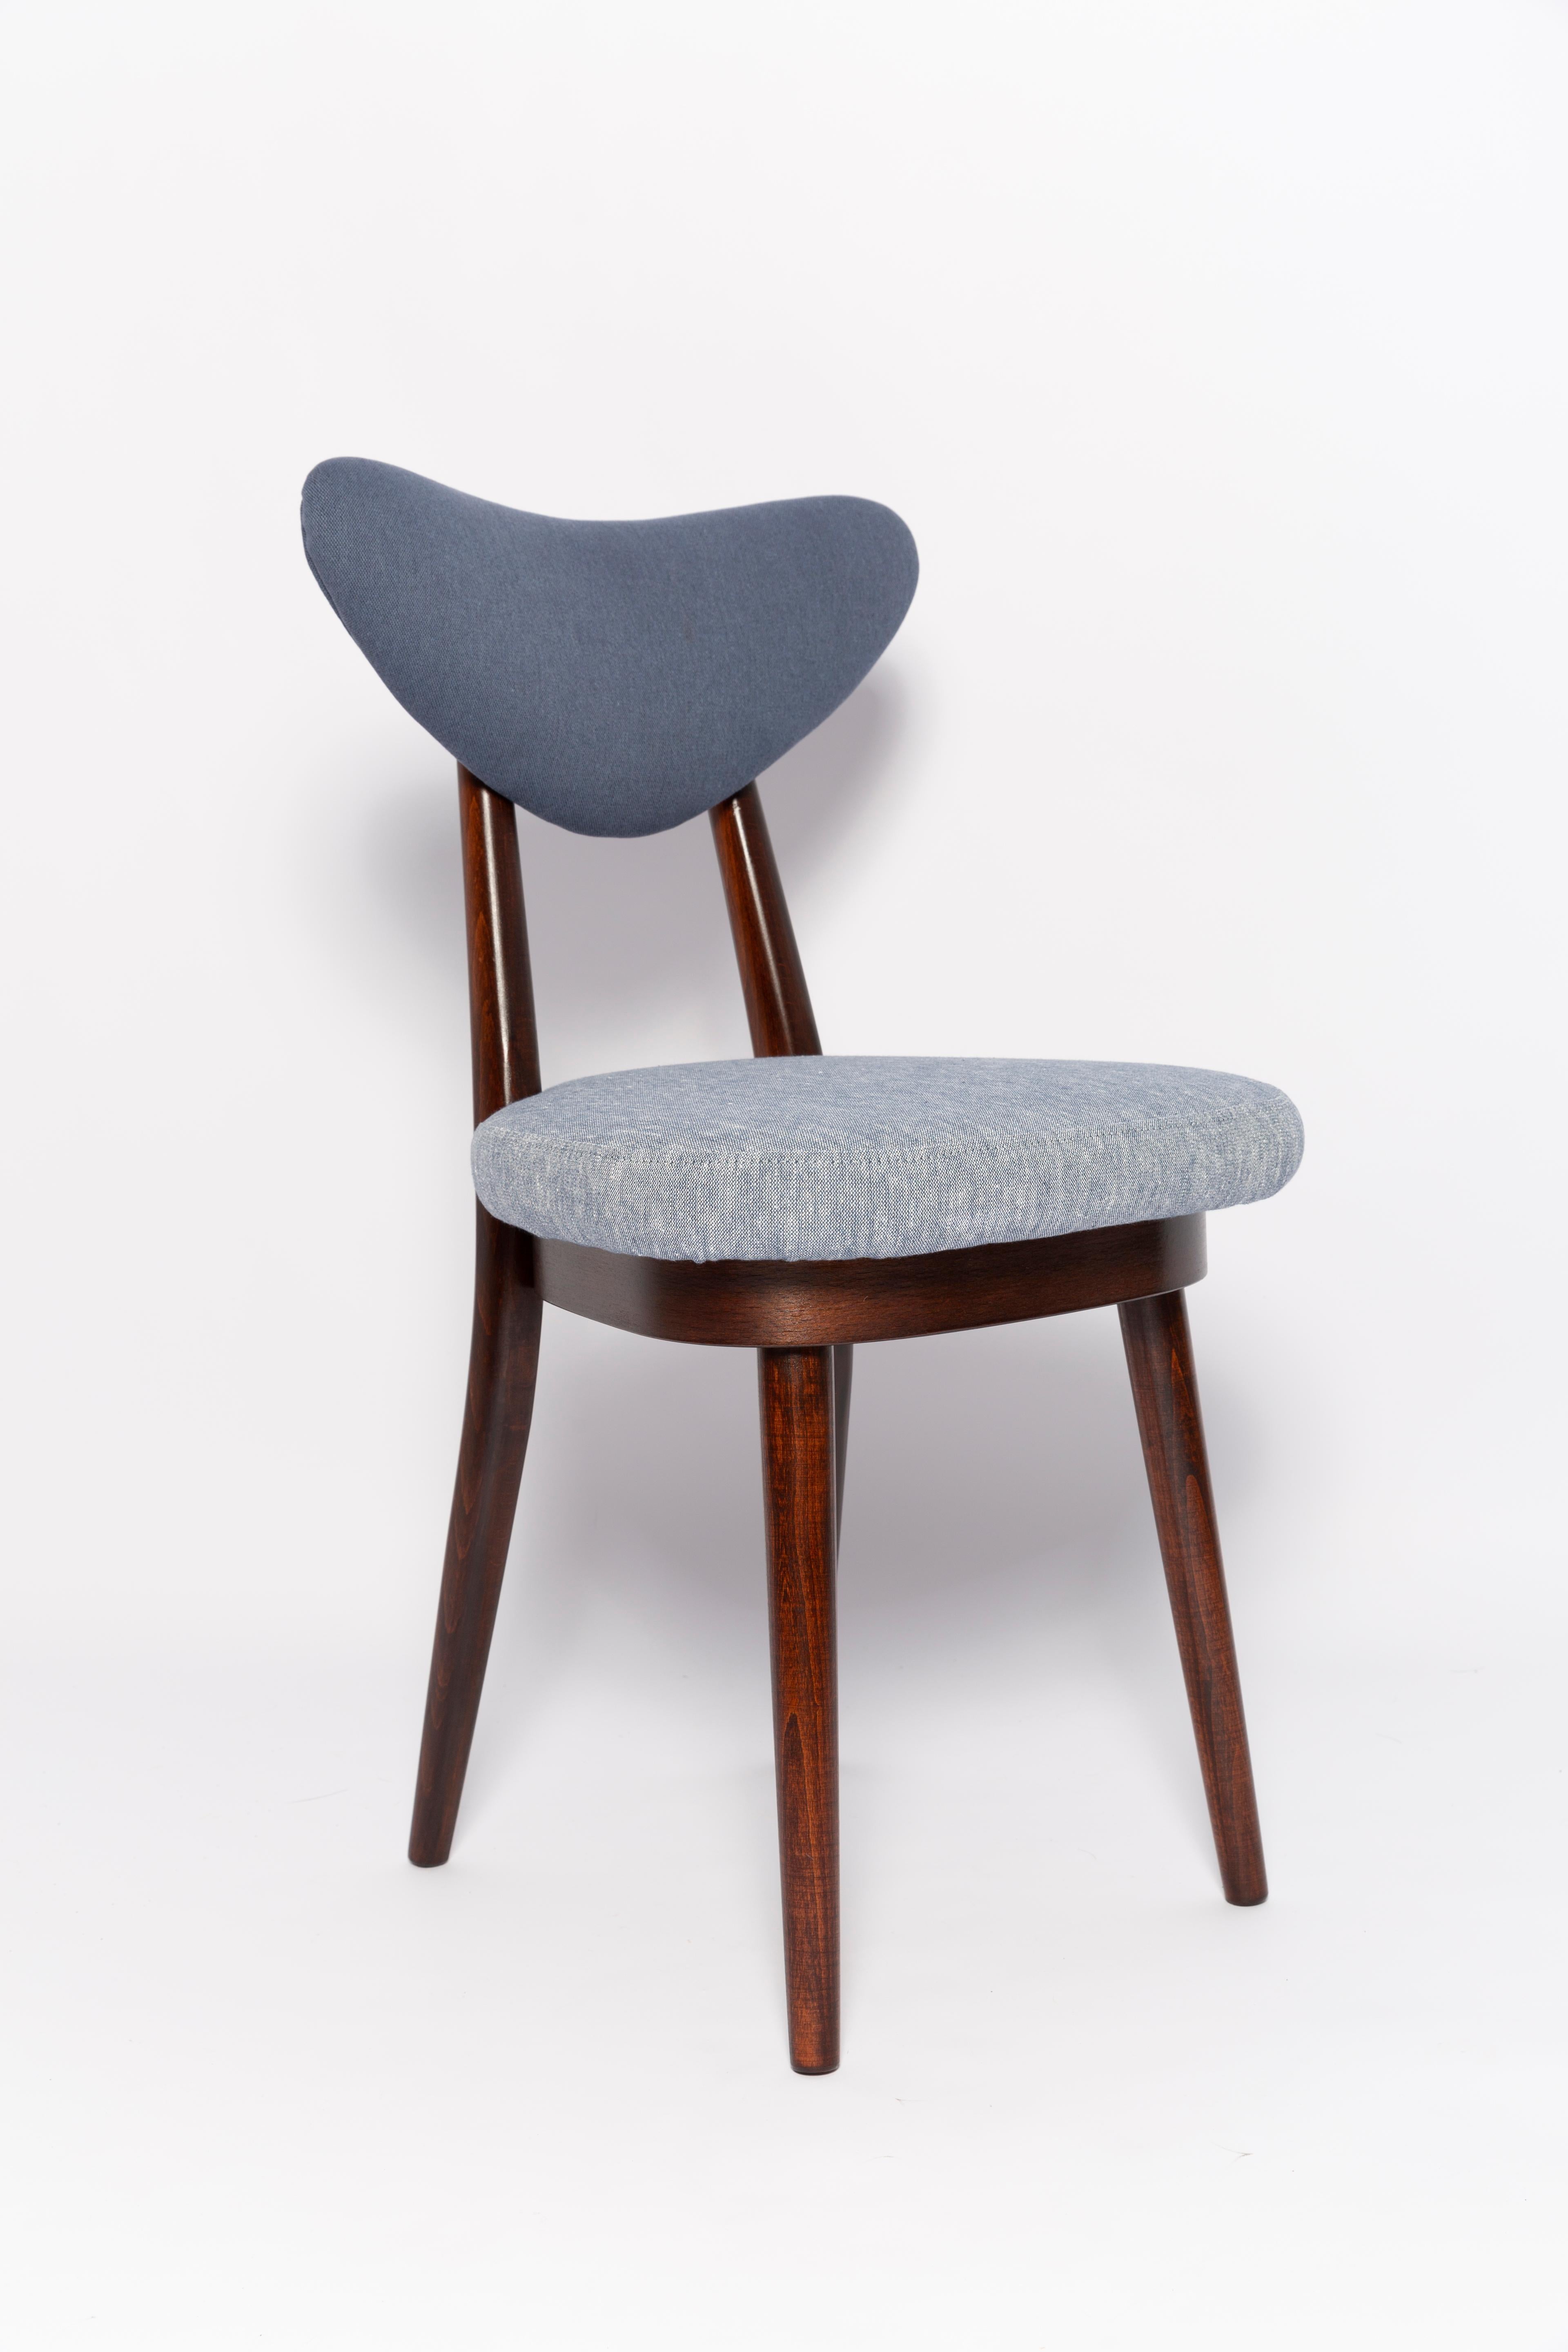 Set of Six Midcentury Light and Medium Blue Denim Heart Chairs, Europe, 1960s In Excellent Condition For Sale In 05-080 Hornowek, PL